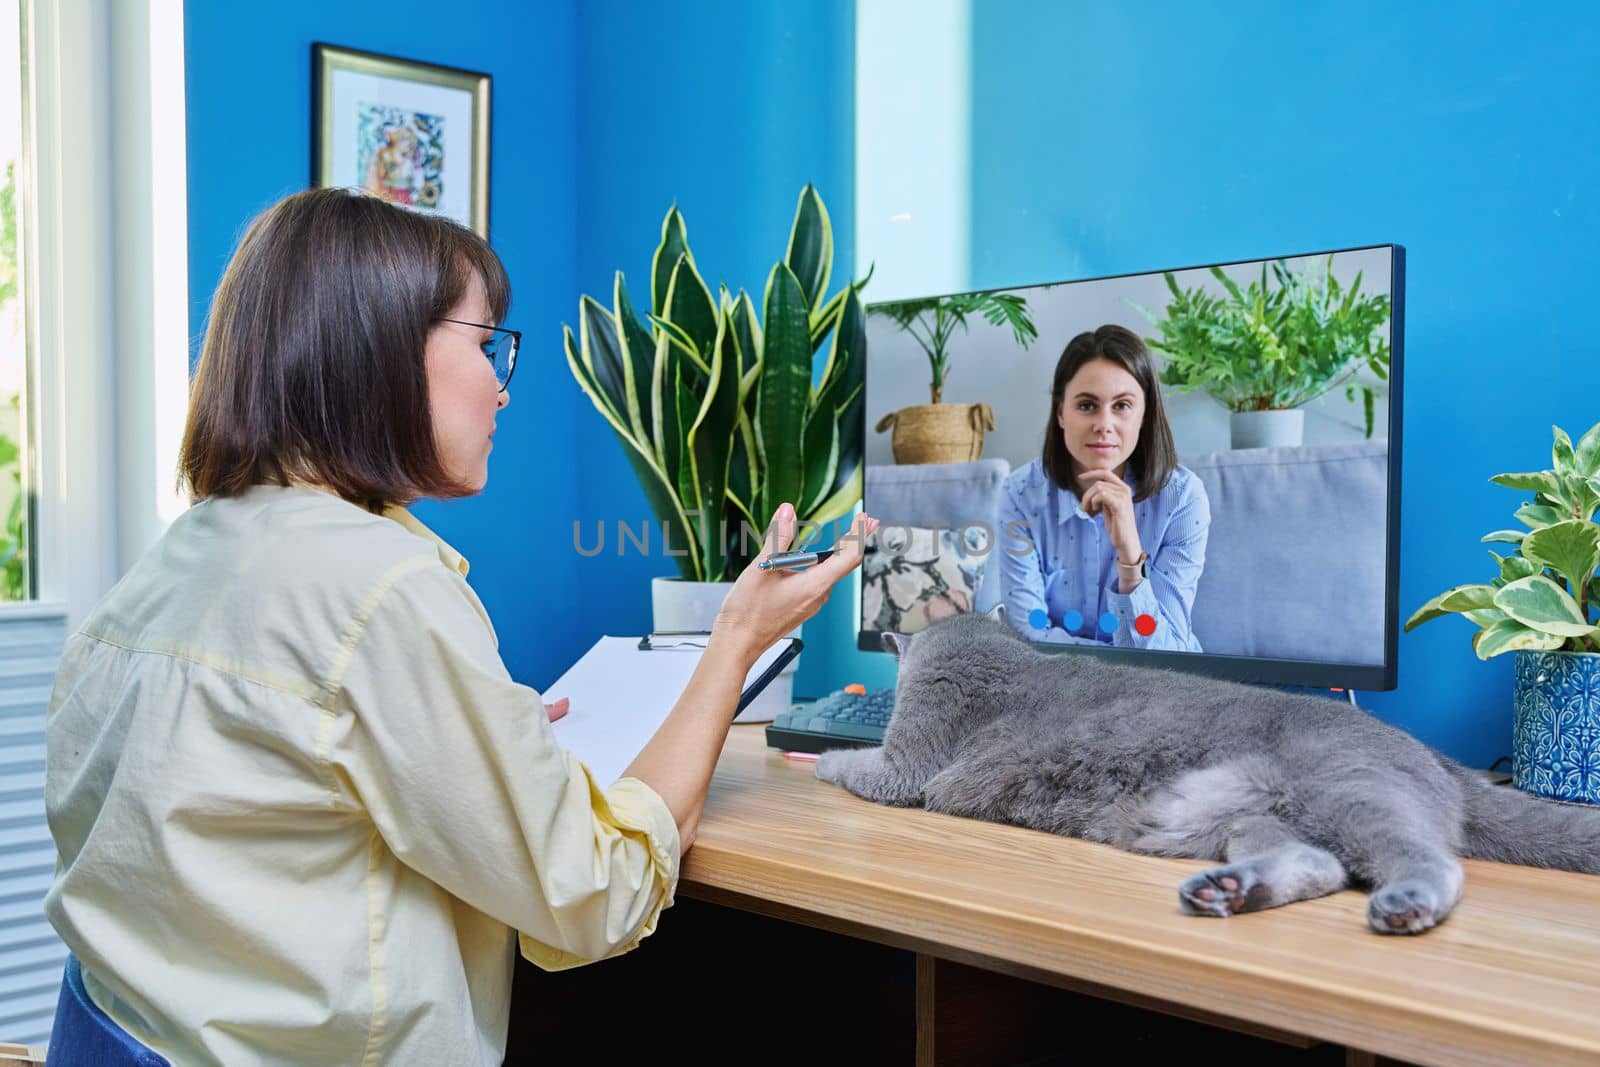 Middle aged woman having video conference with young female by VH-studio